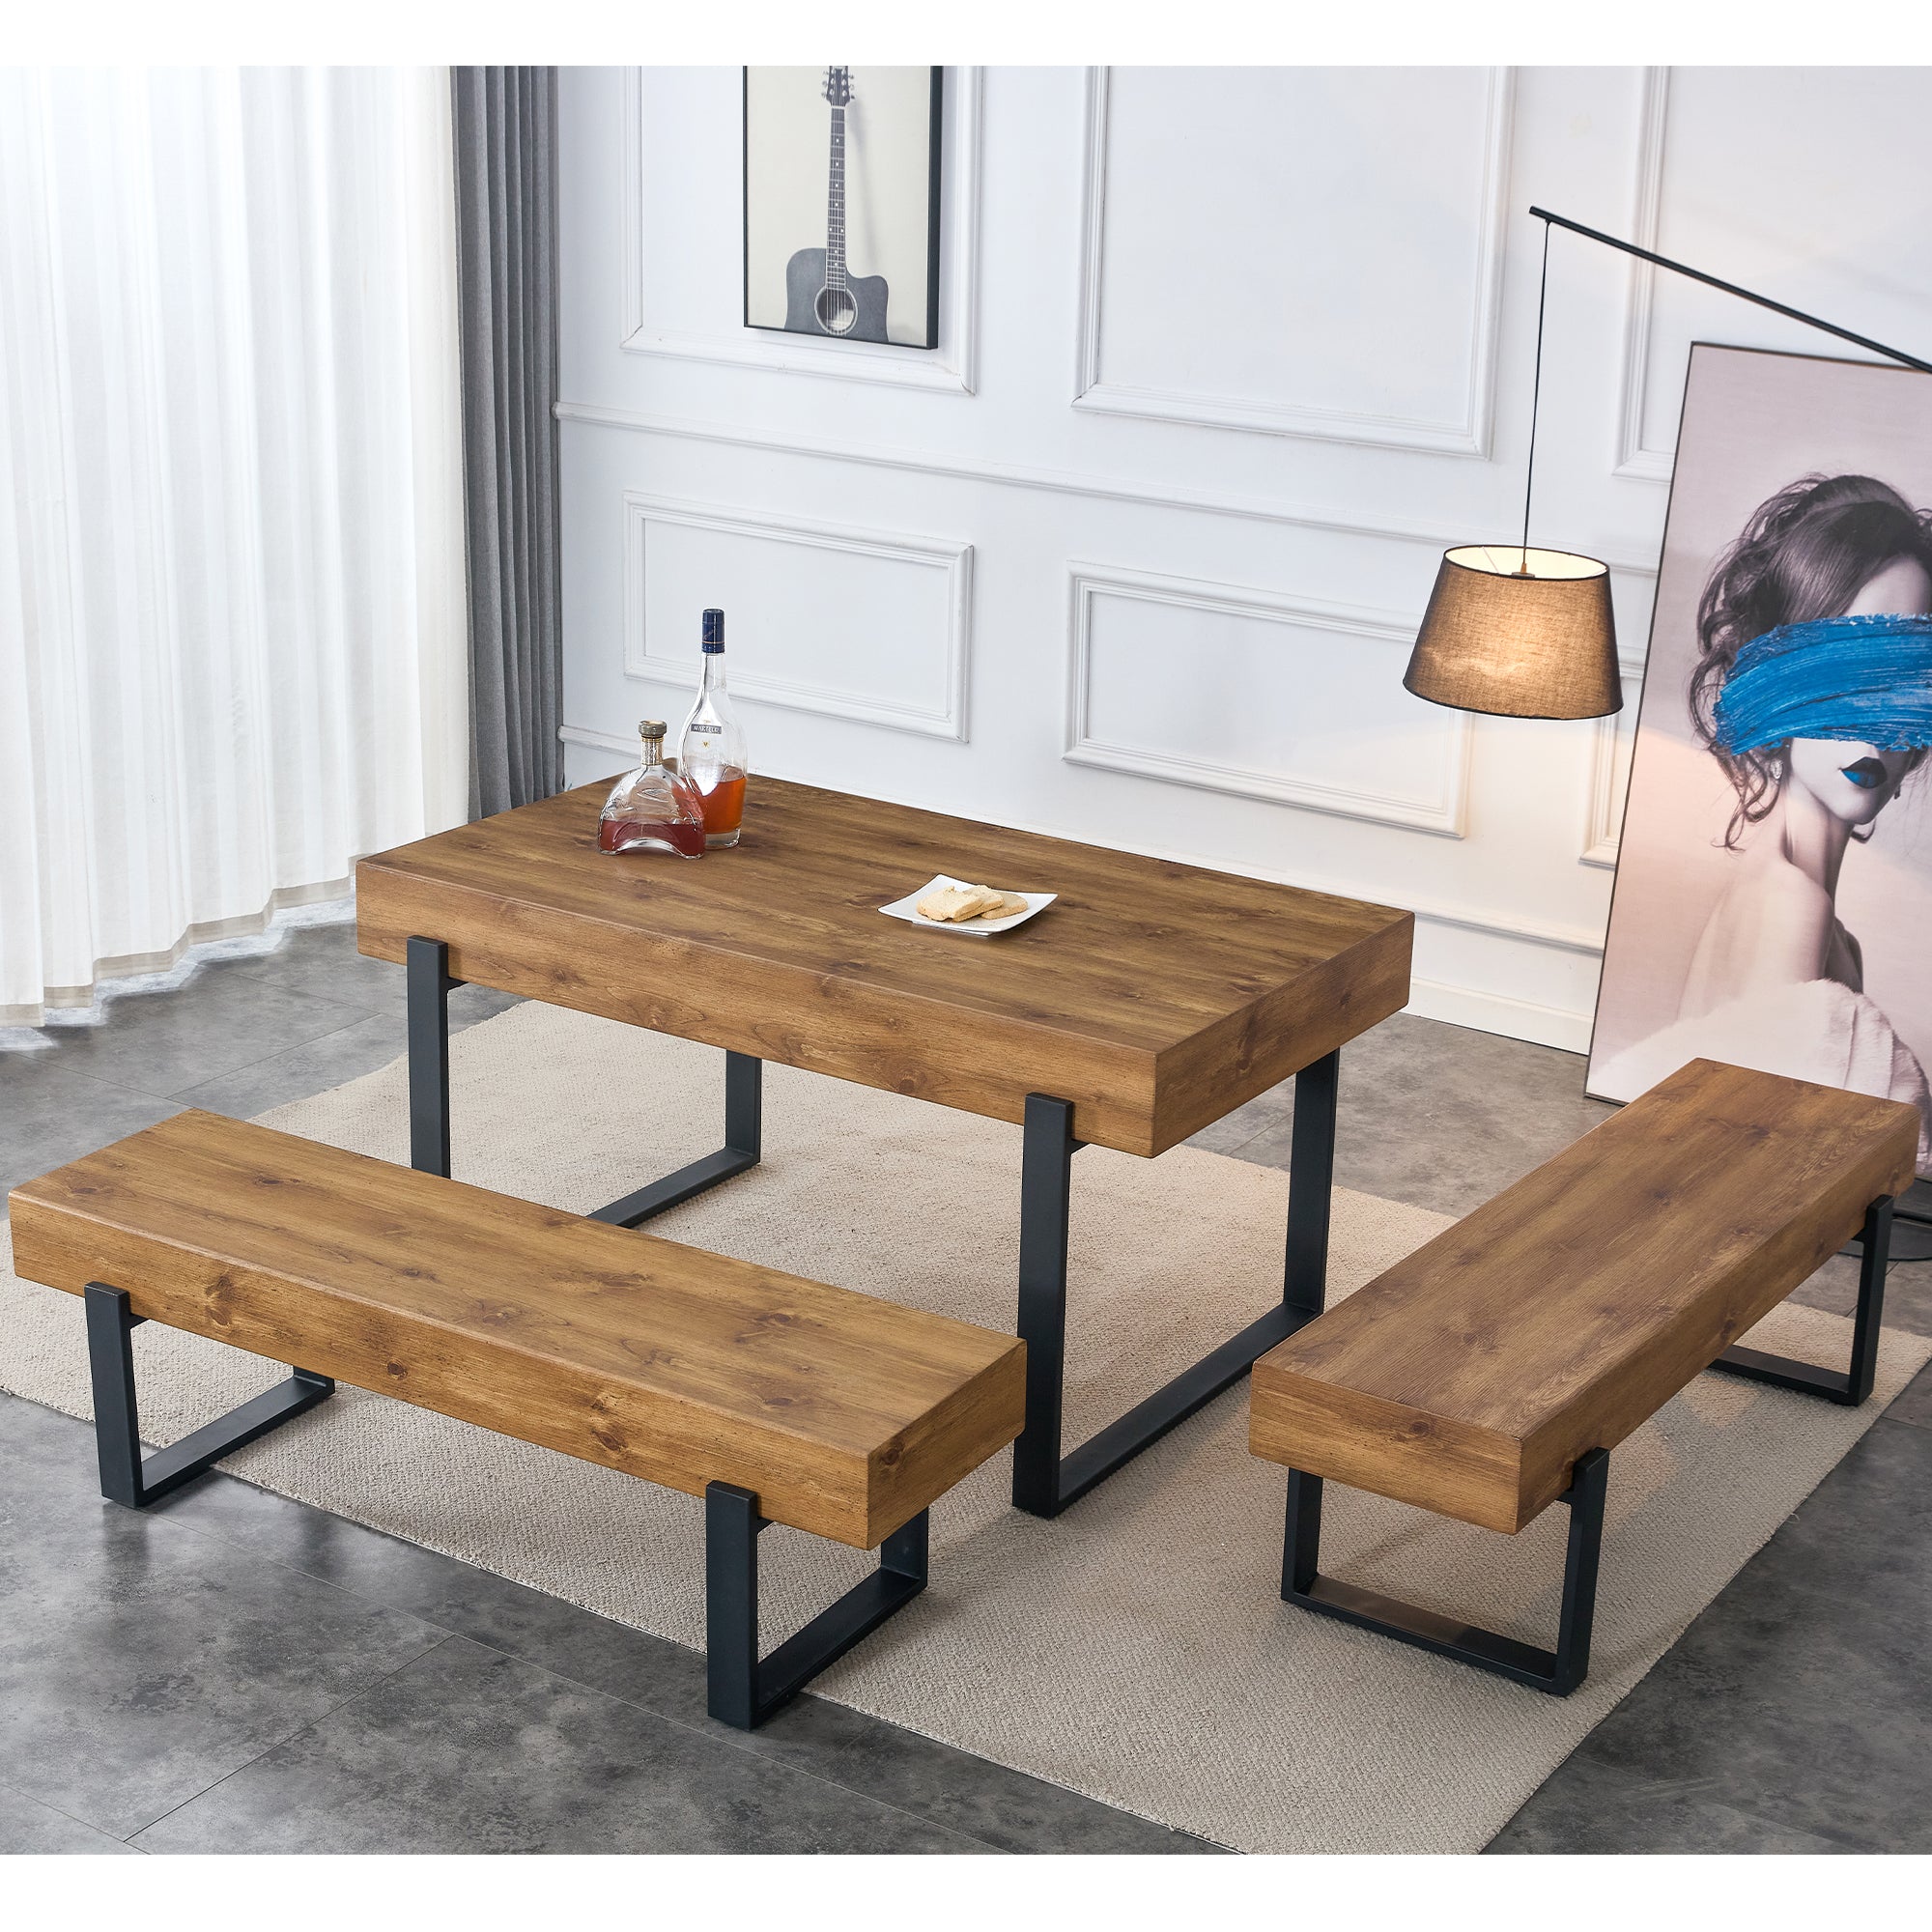 3-Piece Dining Table Set for 4 People, 59" Kitchen Table Set with 2 Bench, Dining Room Table with Heavy-Duty Frame, Easy Assembly - Natural Wood Wash